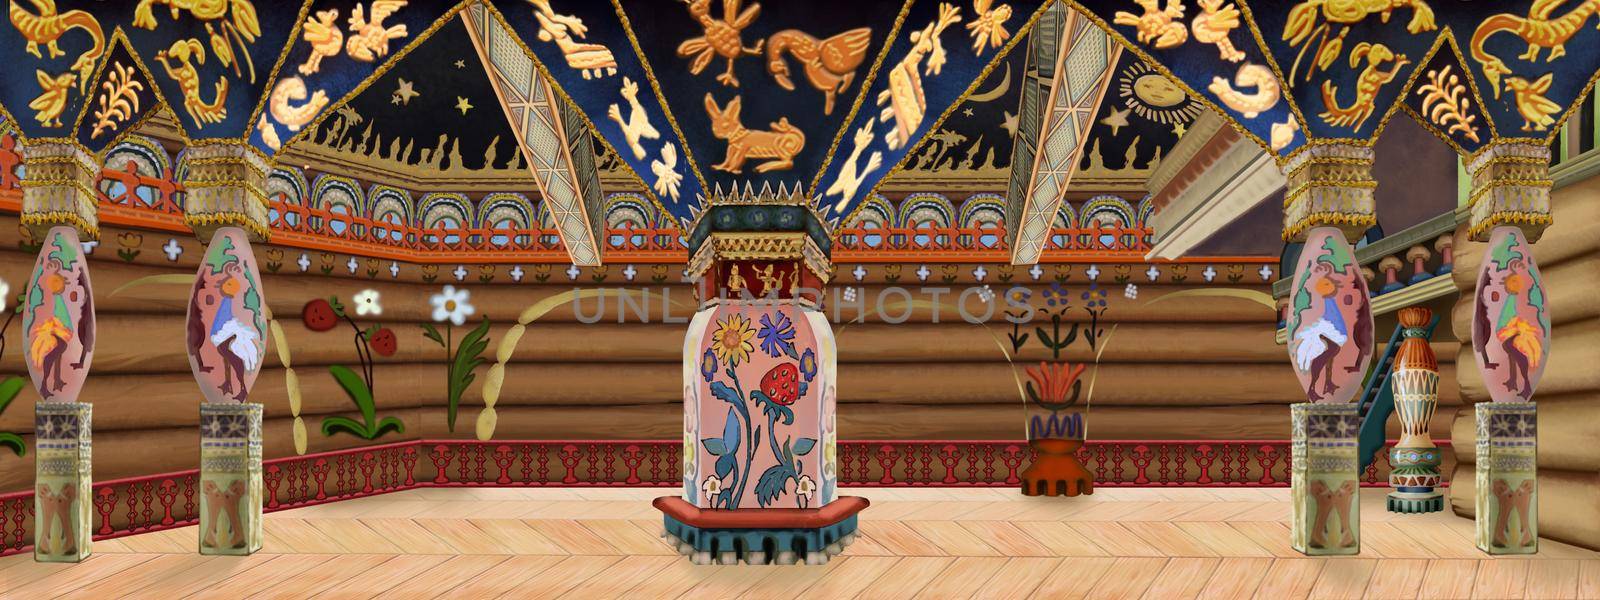 Russian royal chambers decoration in the style of Vasnetsov. Digital Painting Background, Illustration.